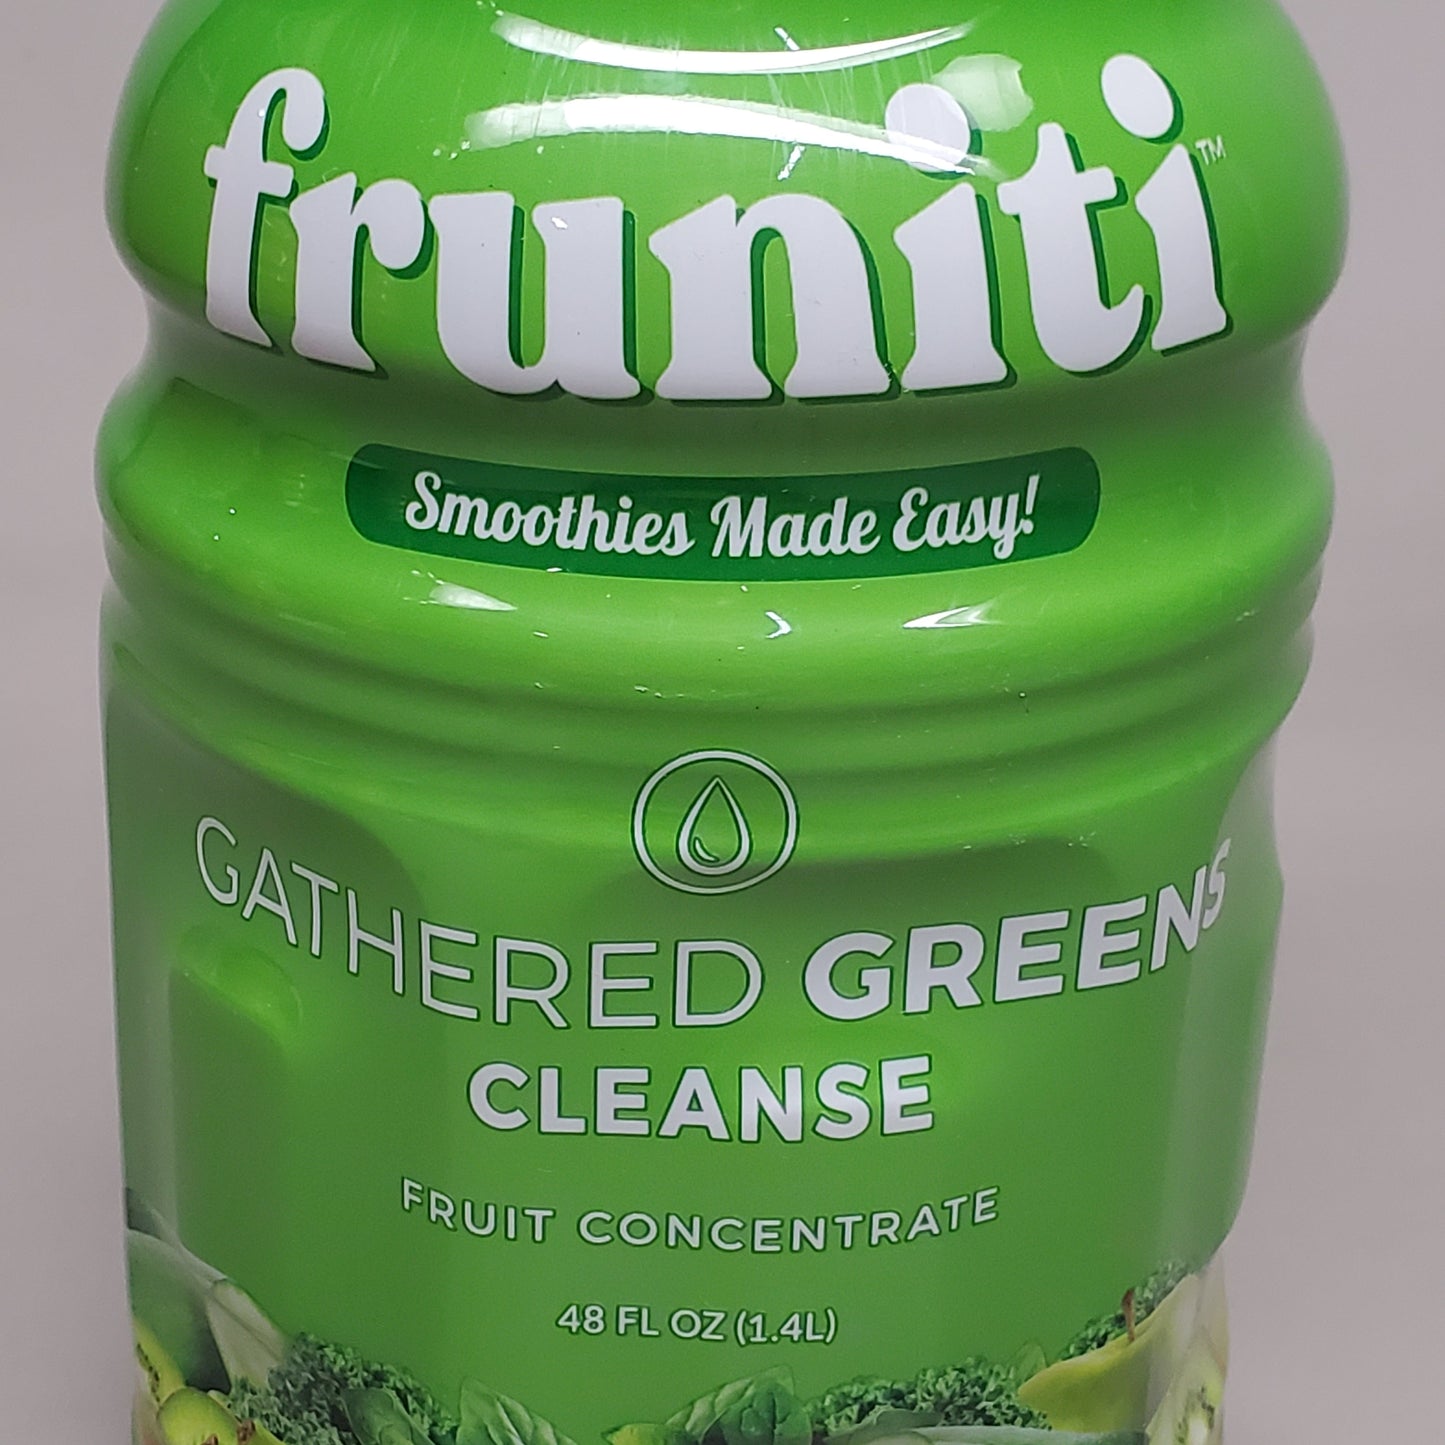 FRUNITI 6-PACK! Gathered Greens Cleans 48 fl oz Fruit Concentrate Smoothies Made Easy (10/23)